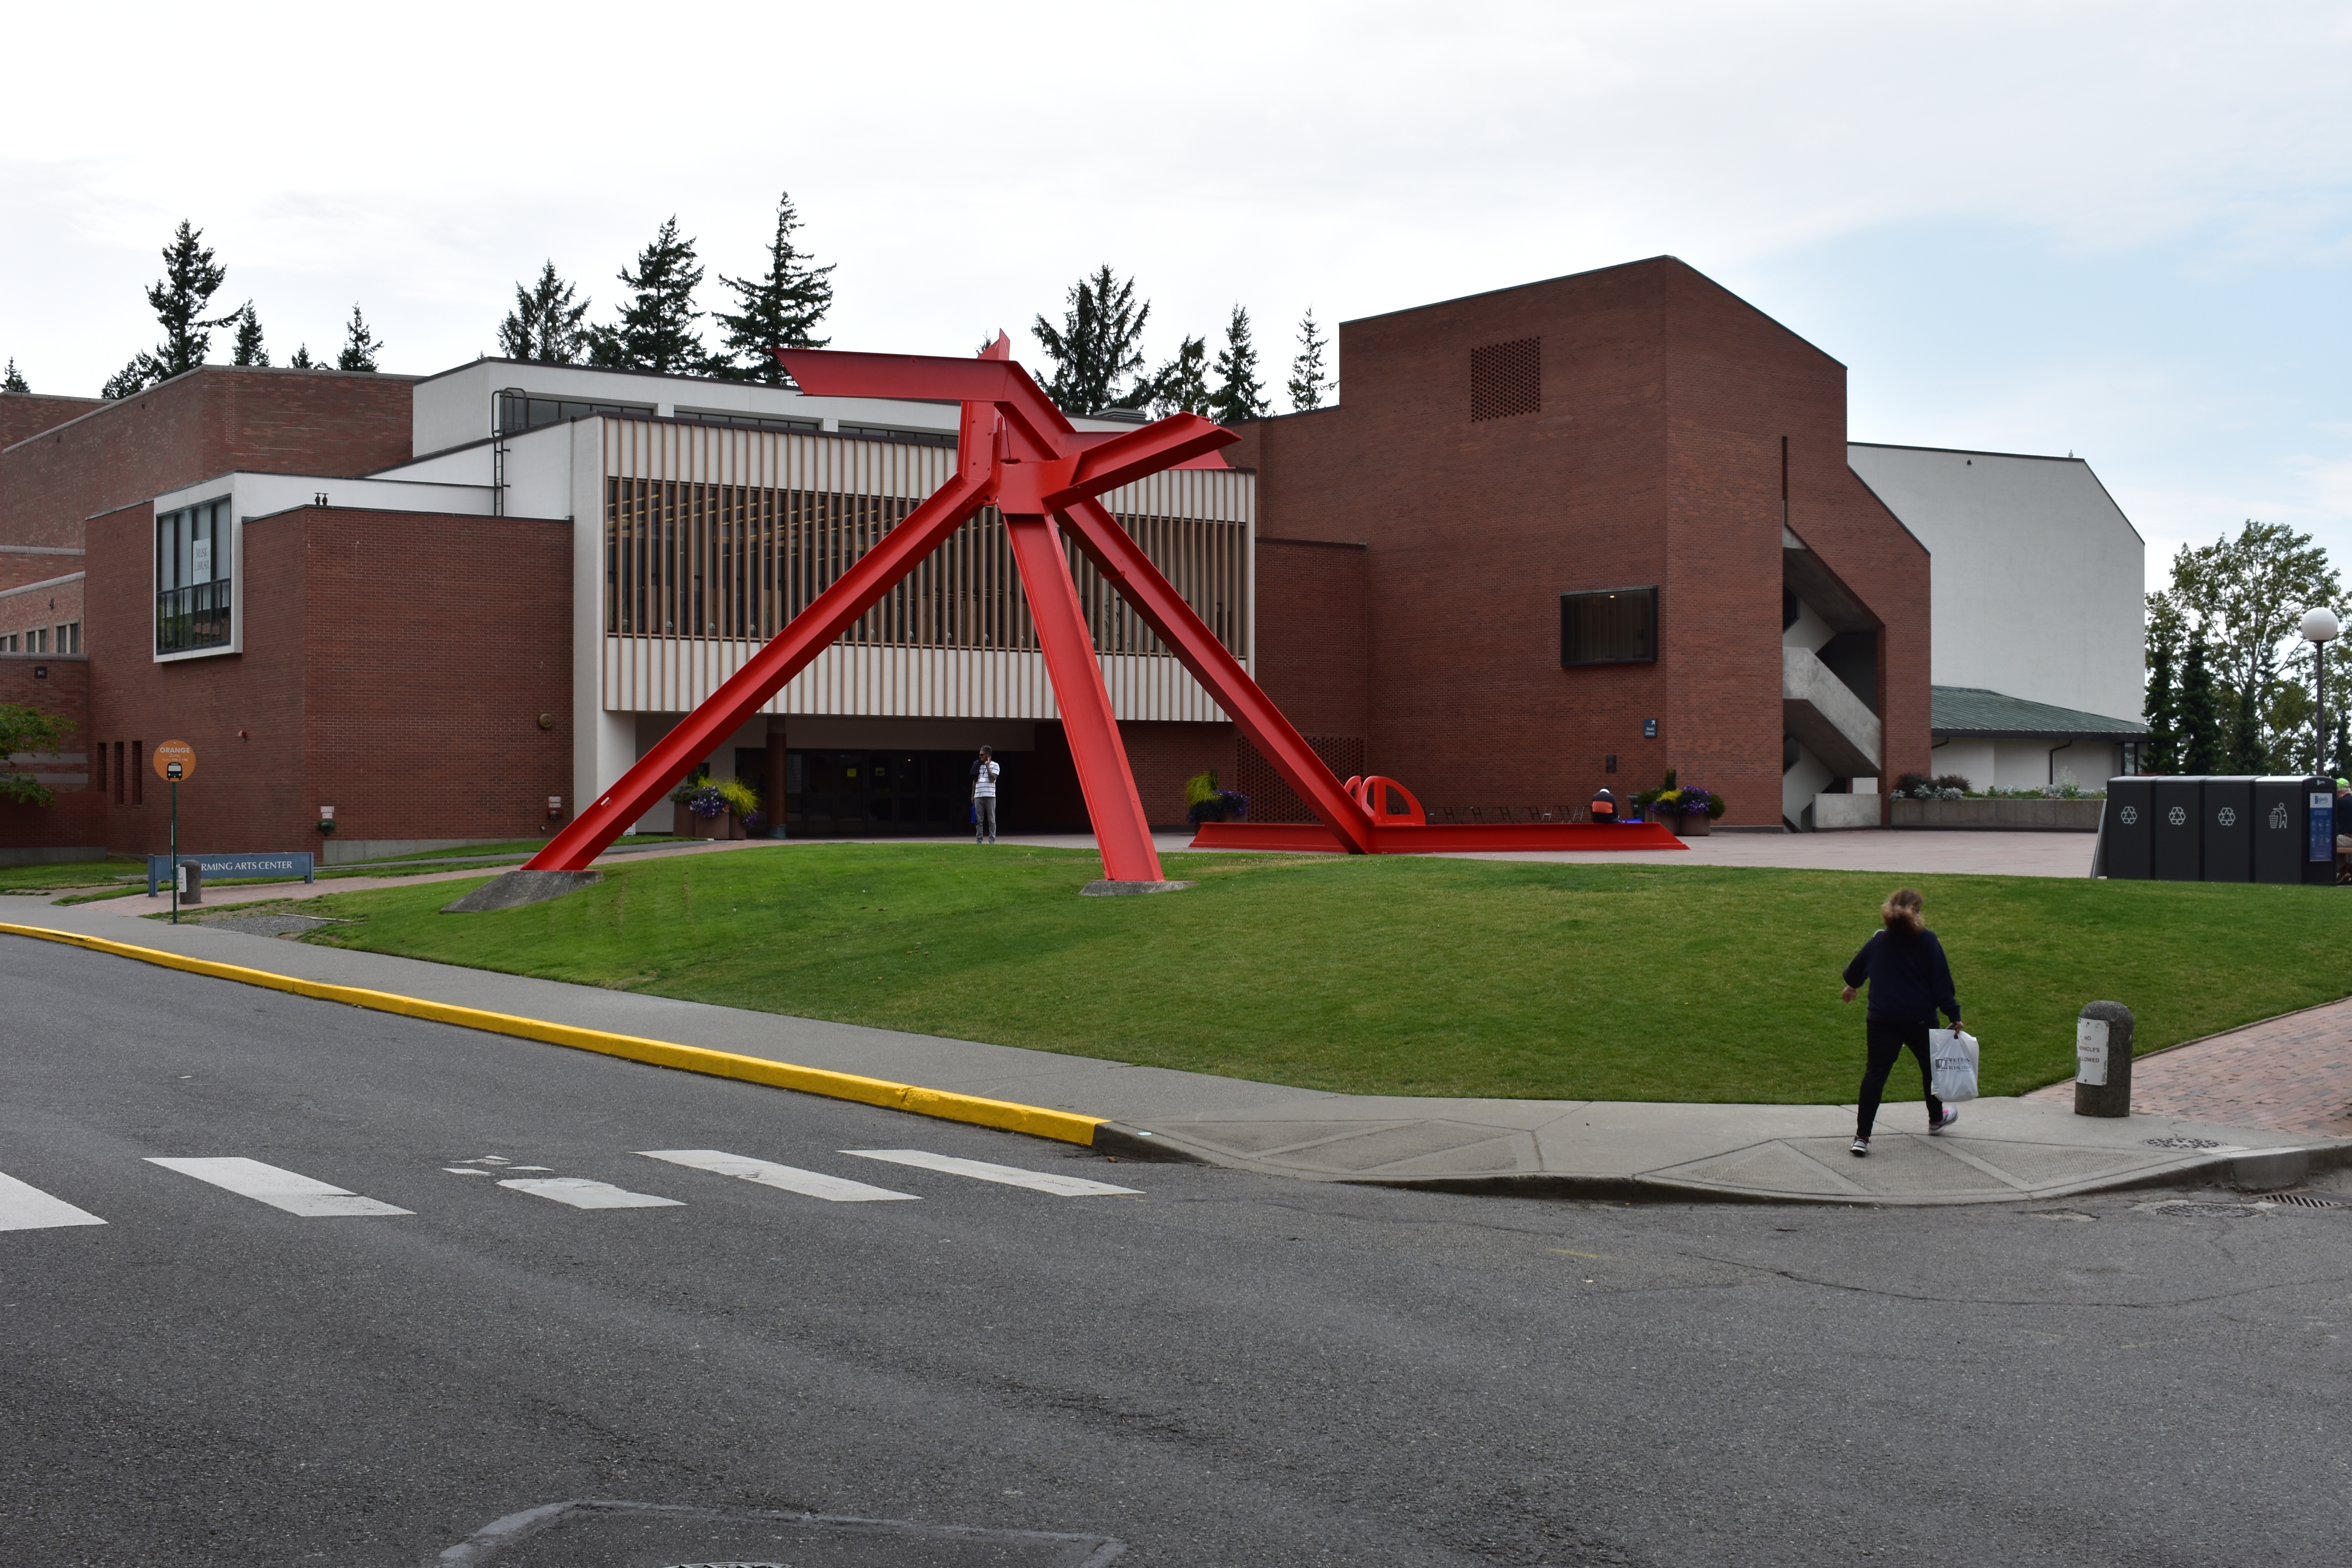 Large triangular sculpture on the lawn in front of the Performing Arts Center plaza and main entrance